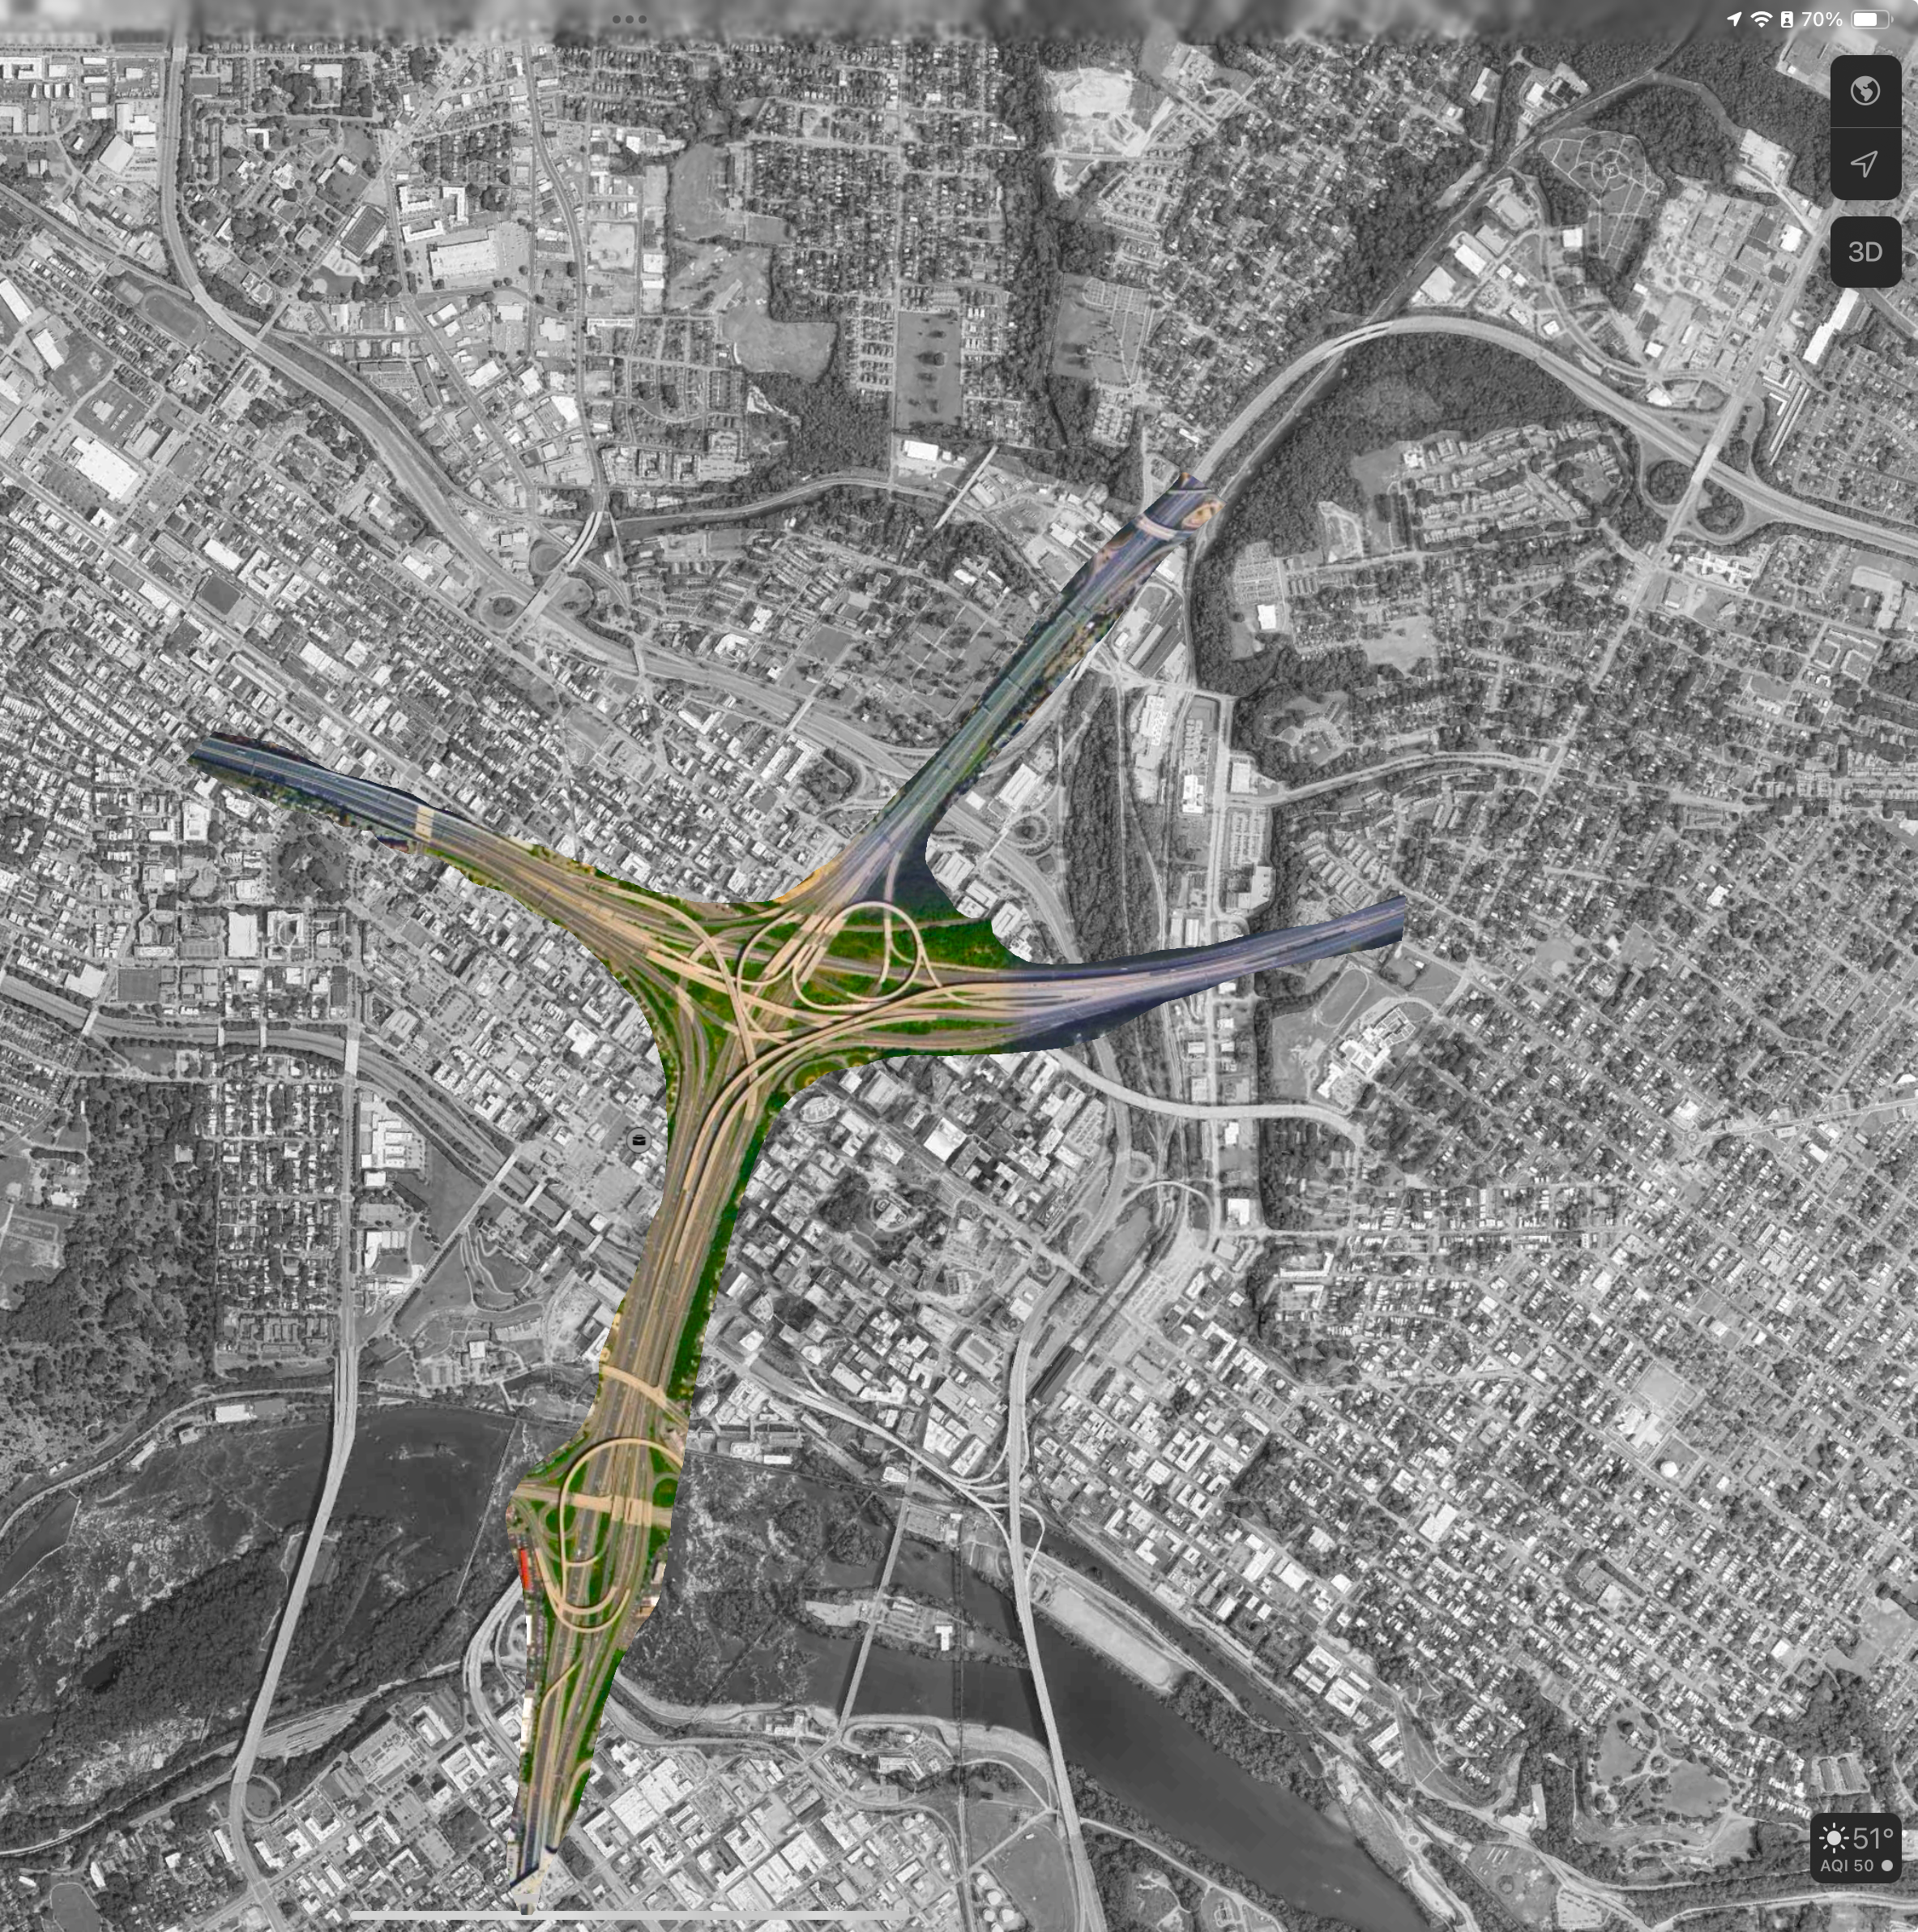 The Mixing Bowl, aka the Springfield Interchange, overlayed on downtown Richmond. It takes up an entire city’s downtown!